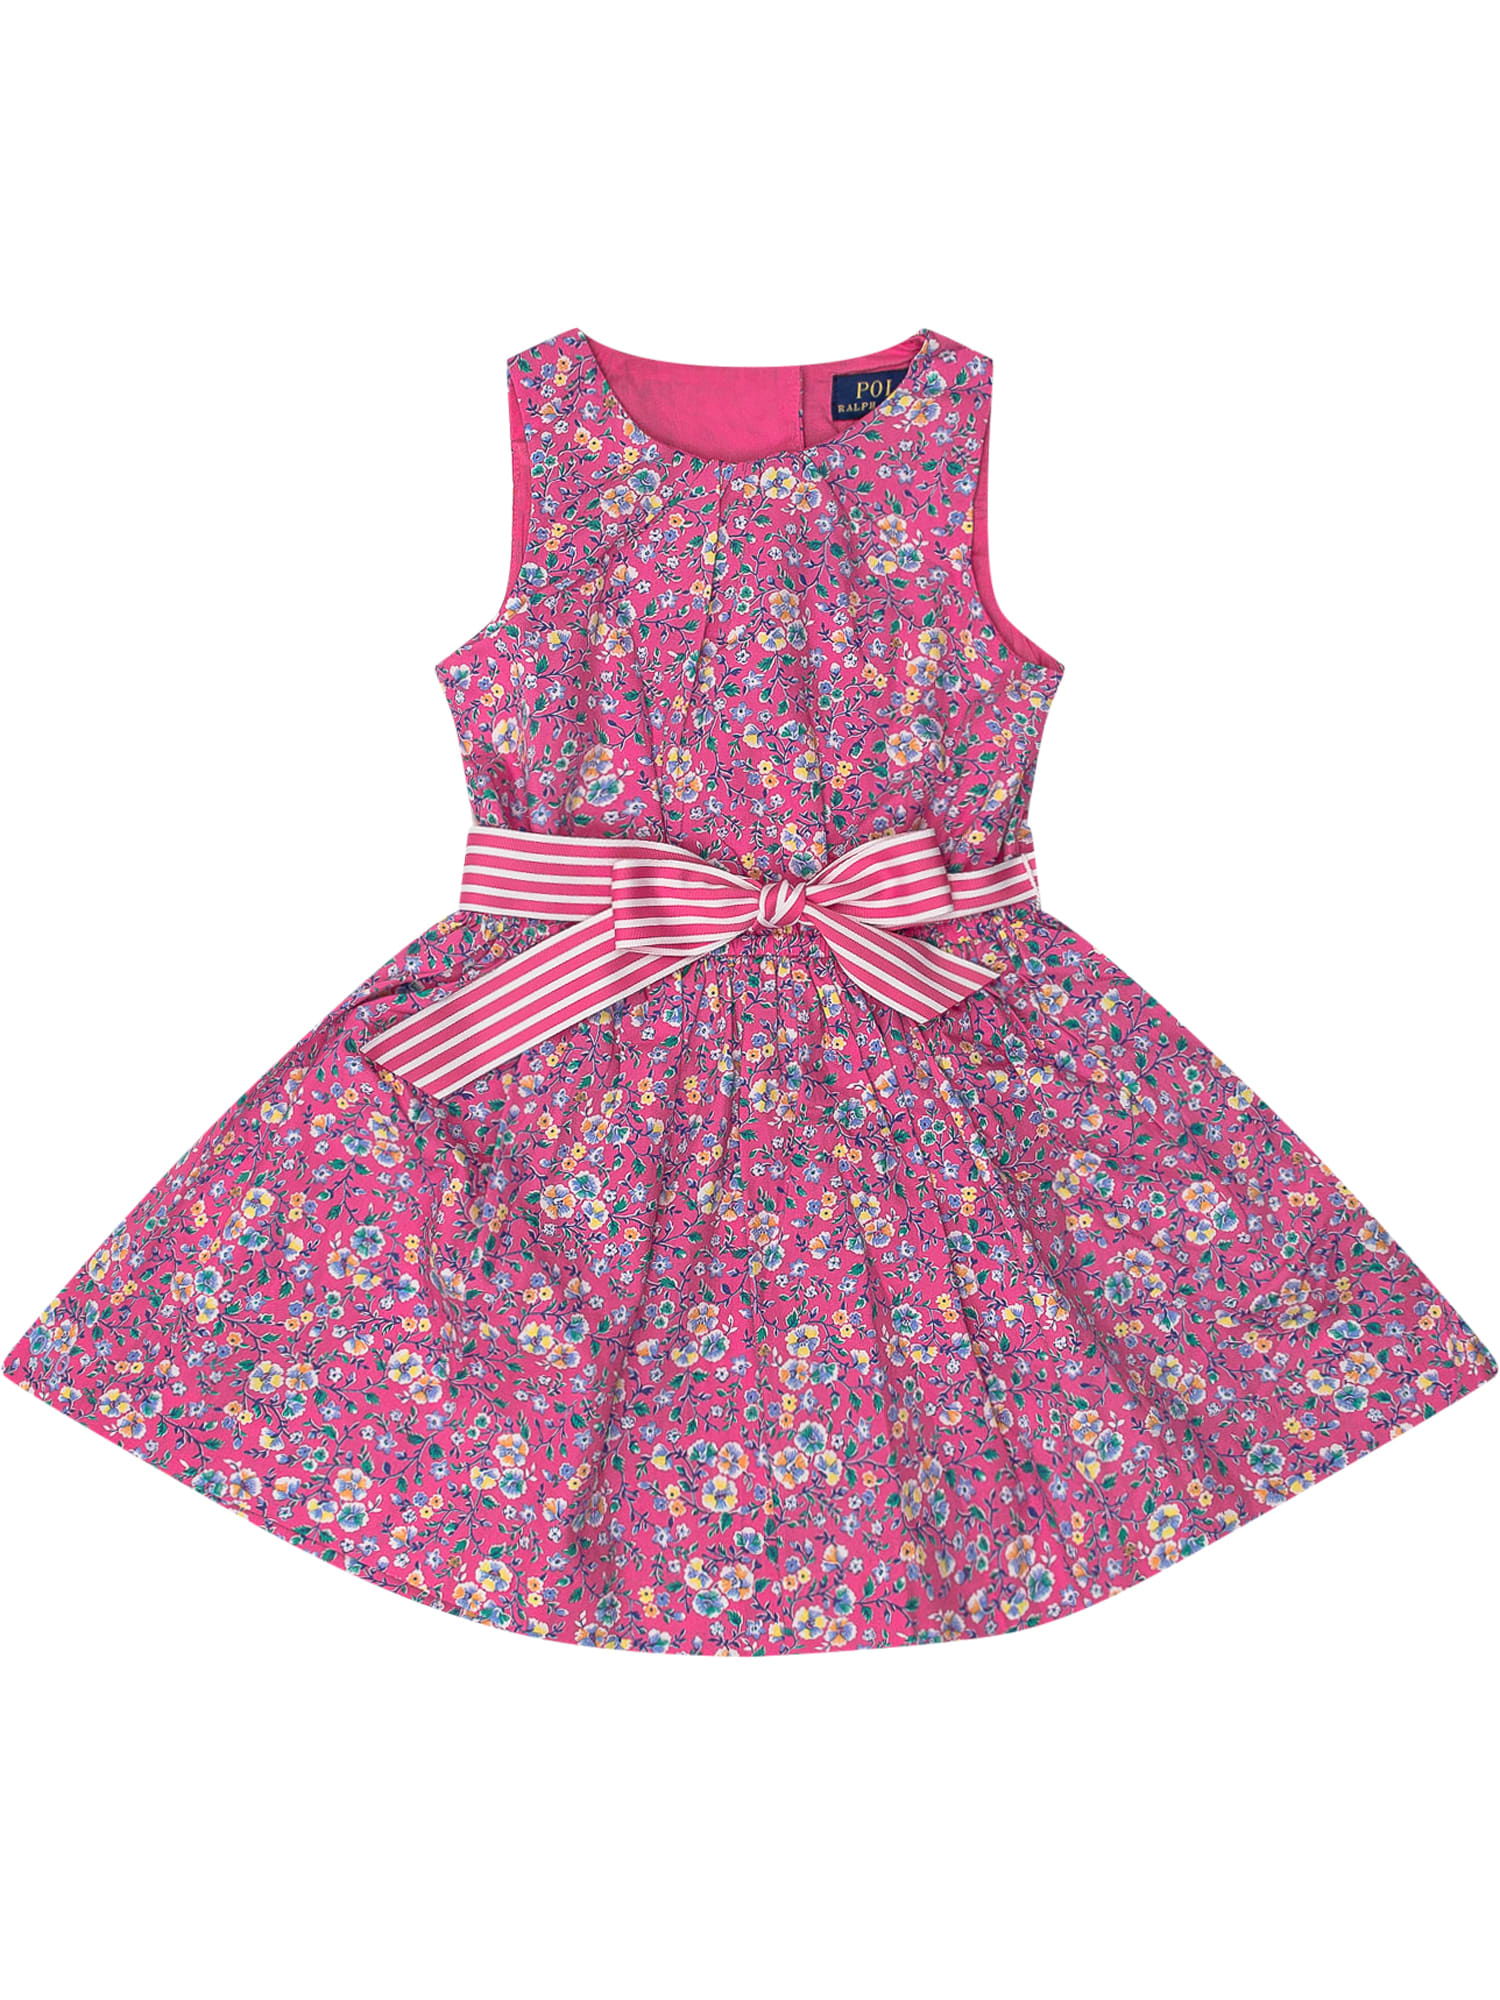 Polo Ralph Lauren Kids' Dress With Flower In Palais Floral Hot Pink